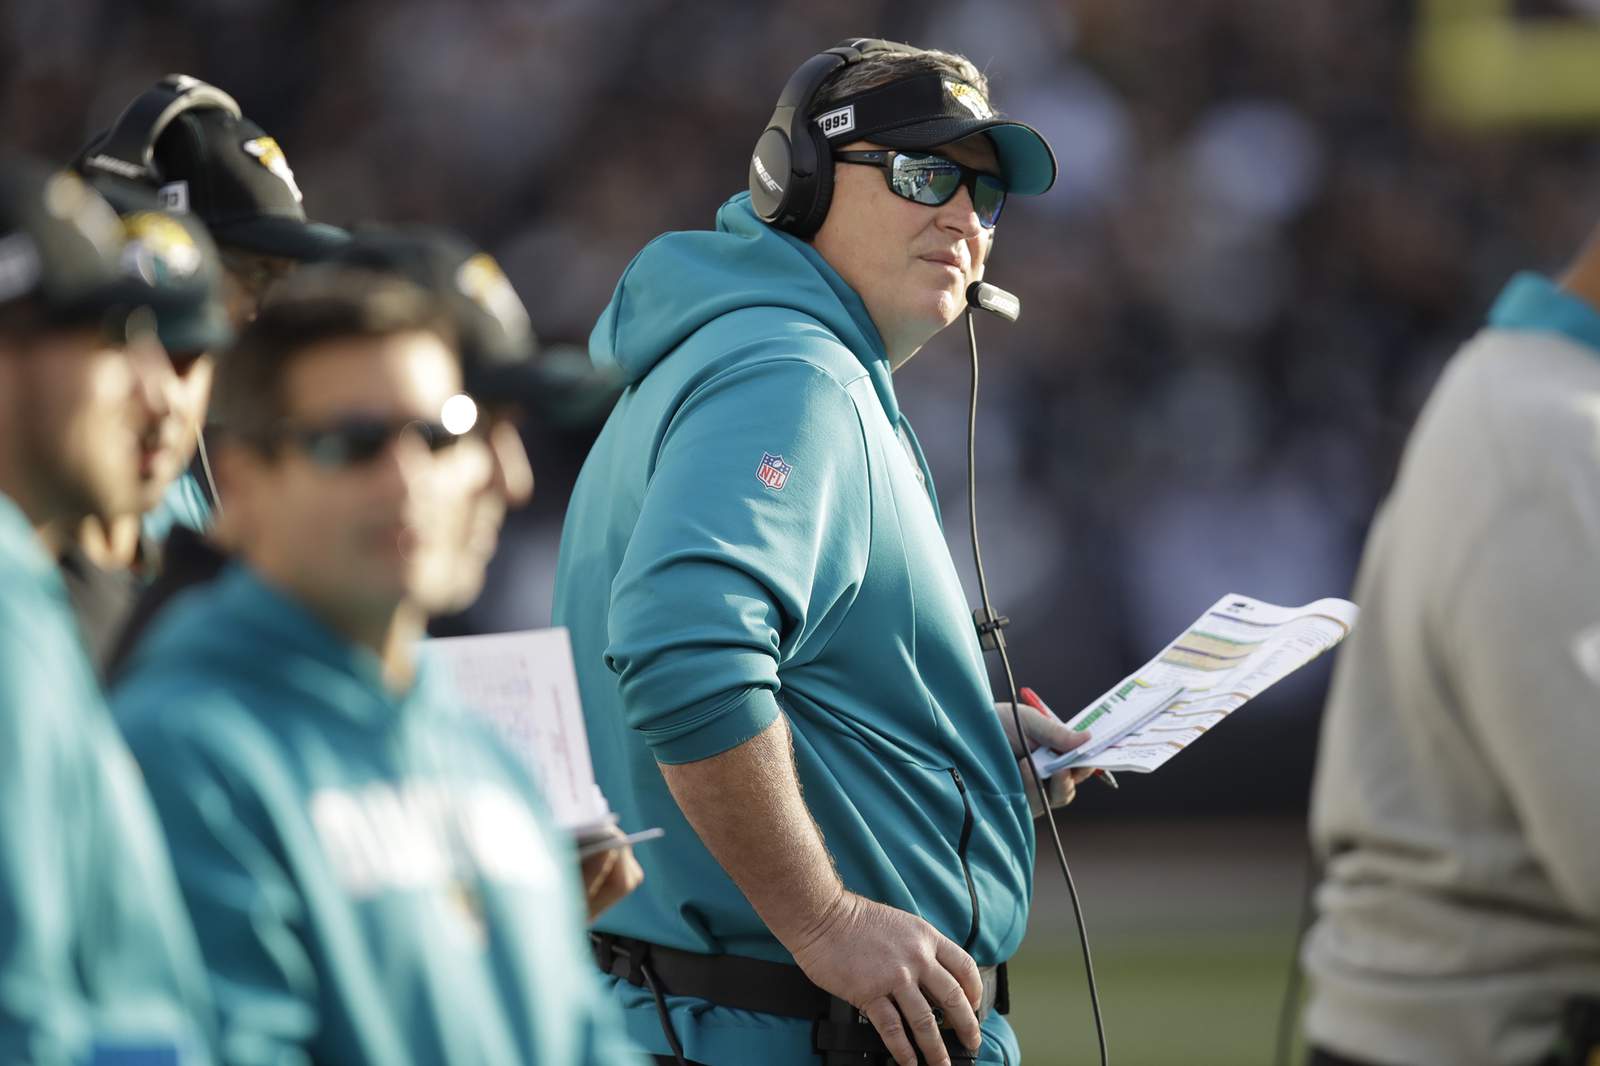 Doug Marrone: Anxiety and challenges are part of new normal for Jaguars